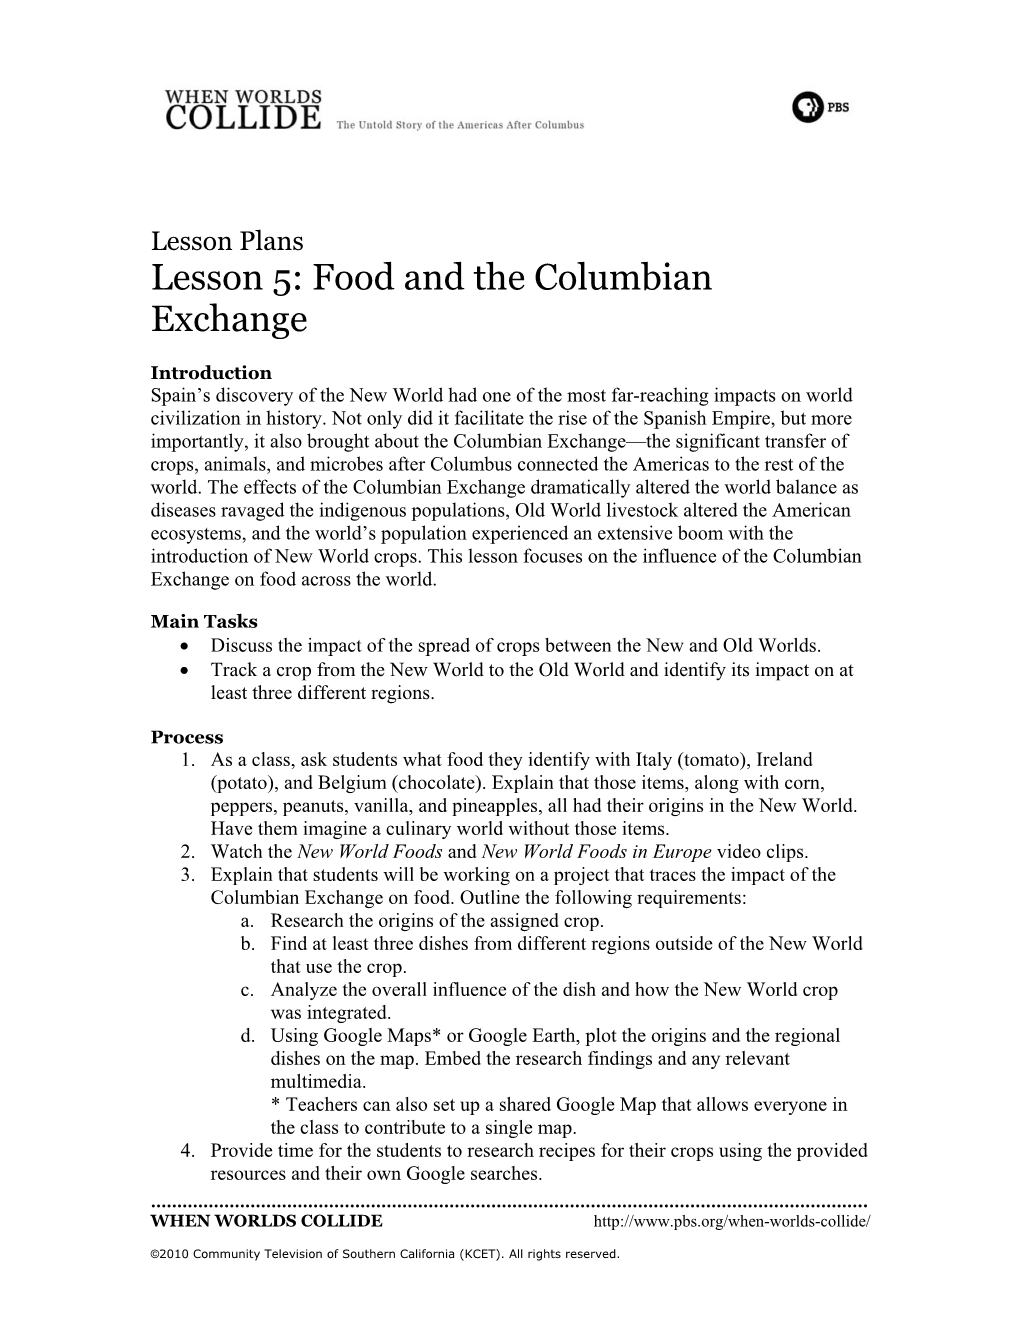 Lesson 5: Food and the Columbian Exchange